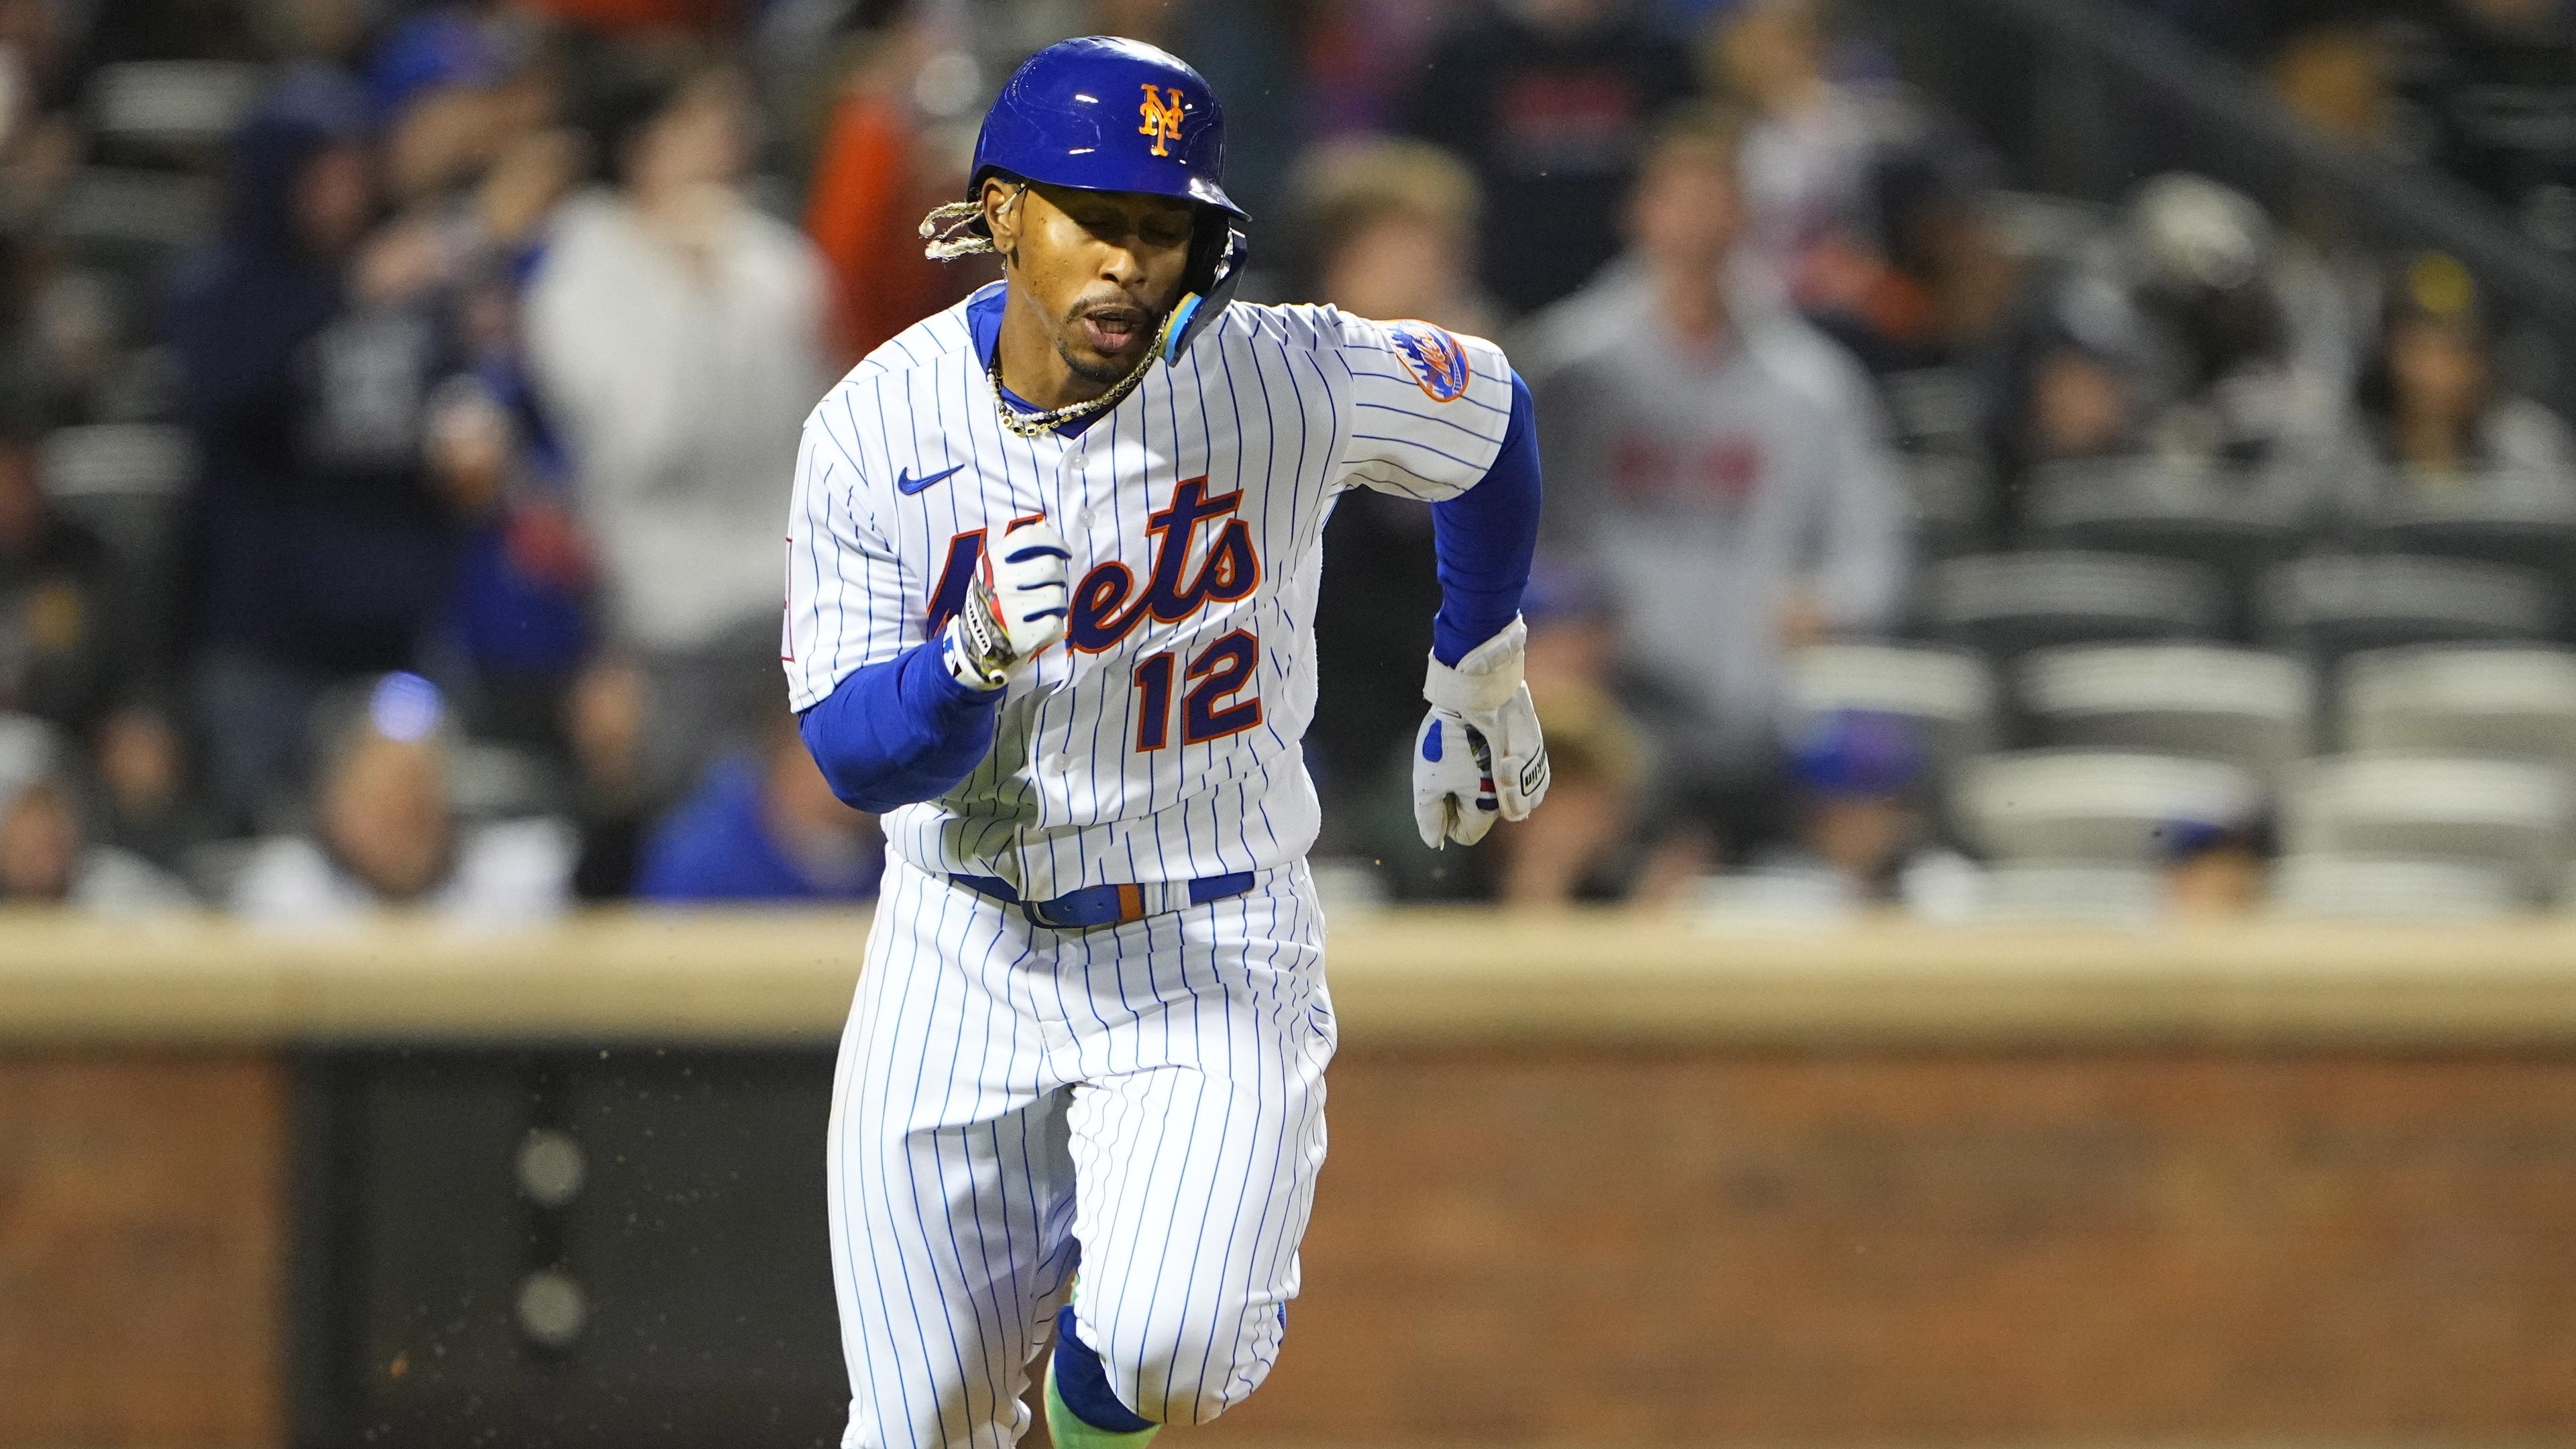 New York Mets shortstop Francisco Lindor (12) runs out an RBI double against the San Diego Padres during the seventh inning at Citi Field / Gregory Fisher - USA TODAY Sports